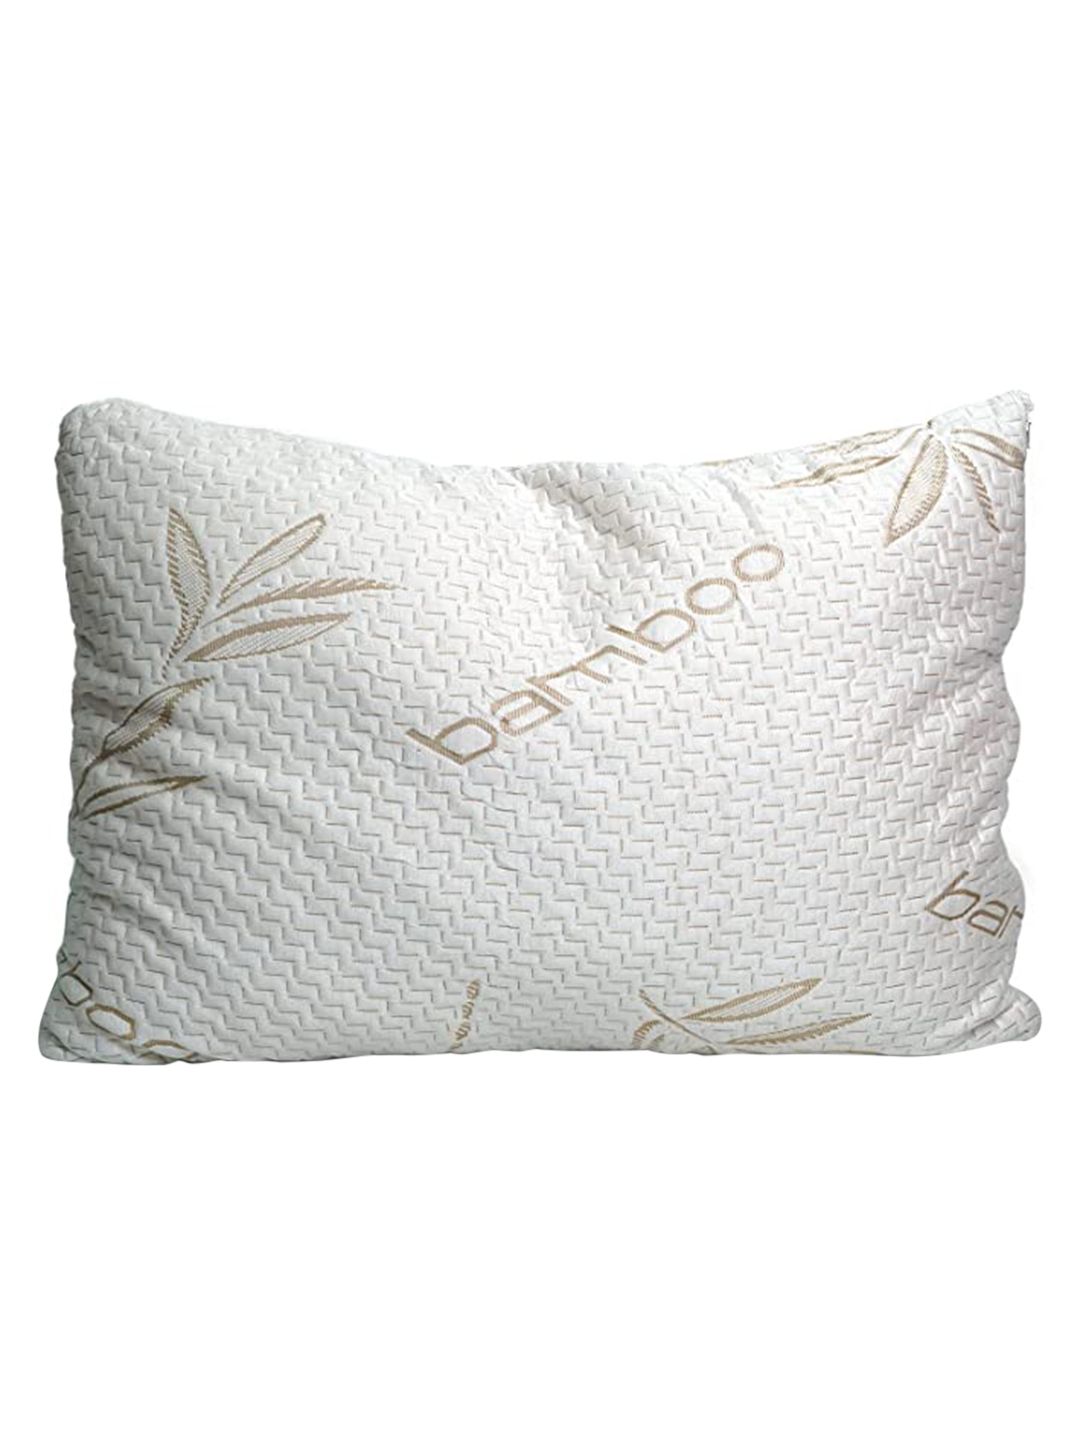 Sleepsia Cream-colored Printed Pillow With Cover Price in India